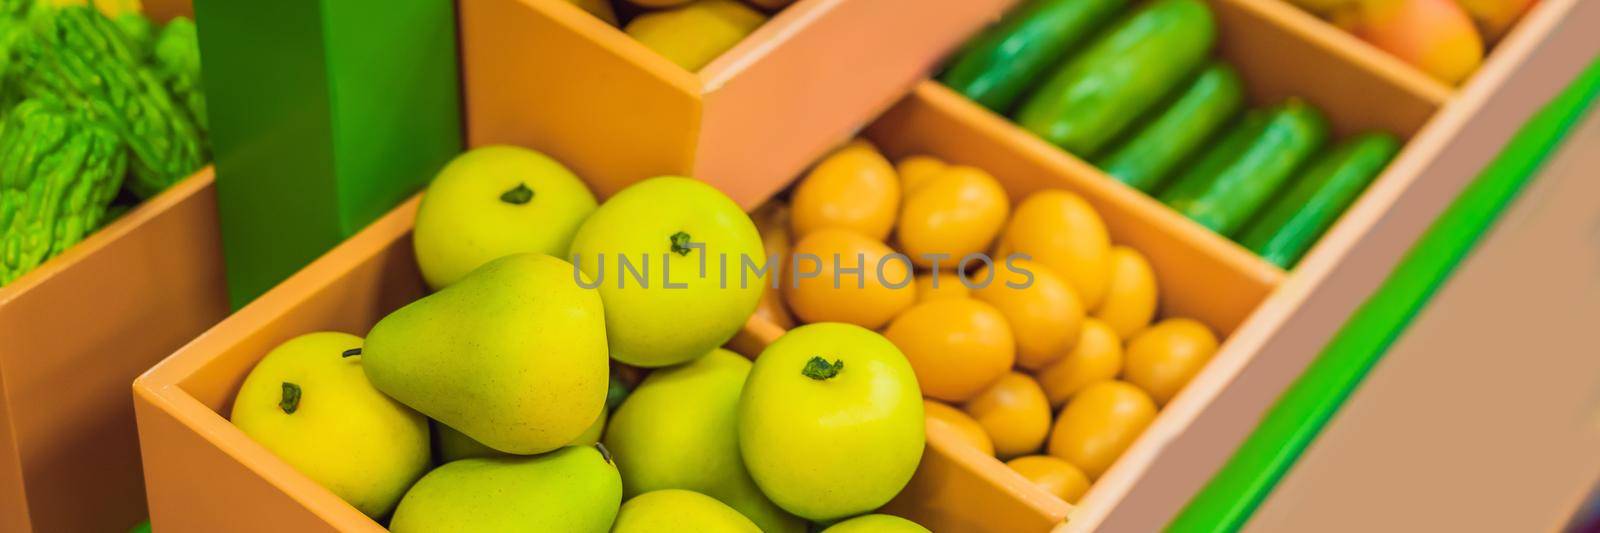 Vegetables and fruits in a toy supermarket. BANNER, LONG FORMAT